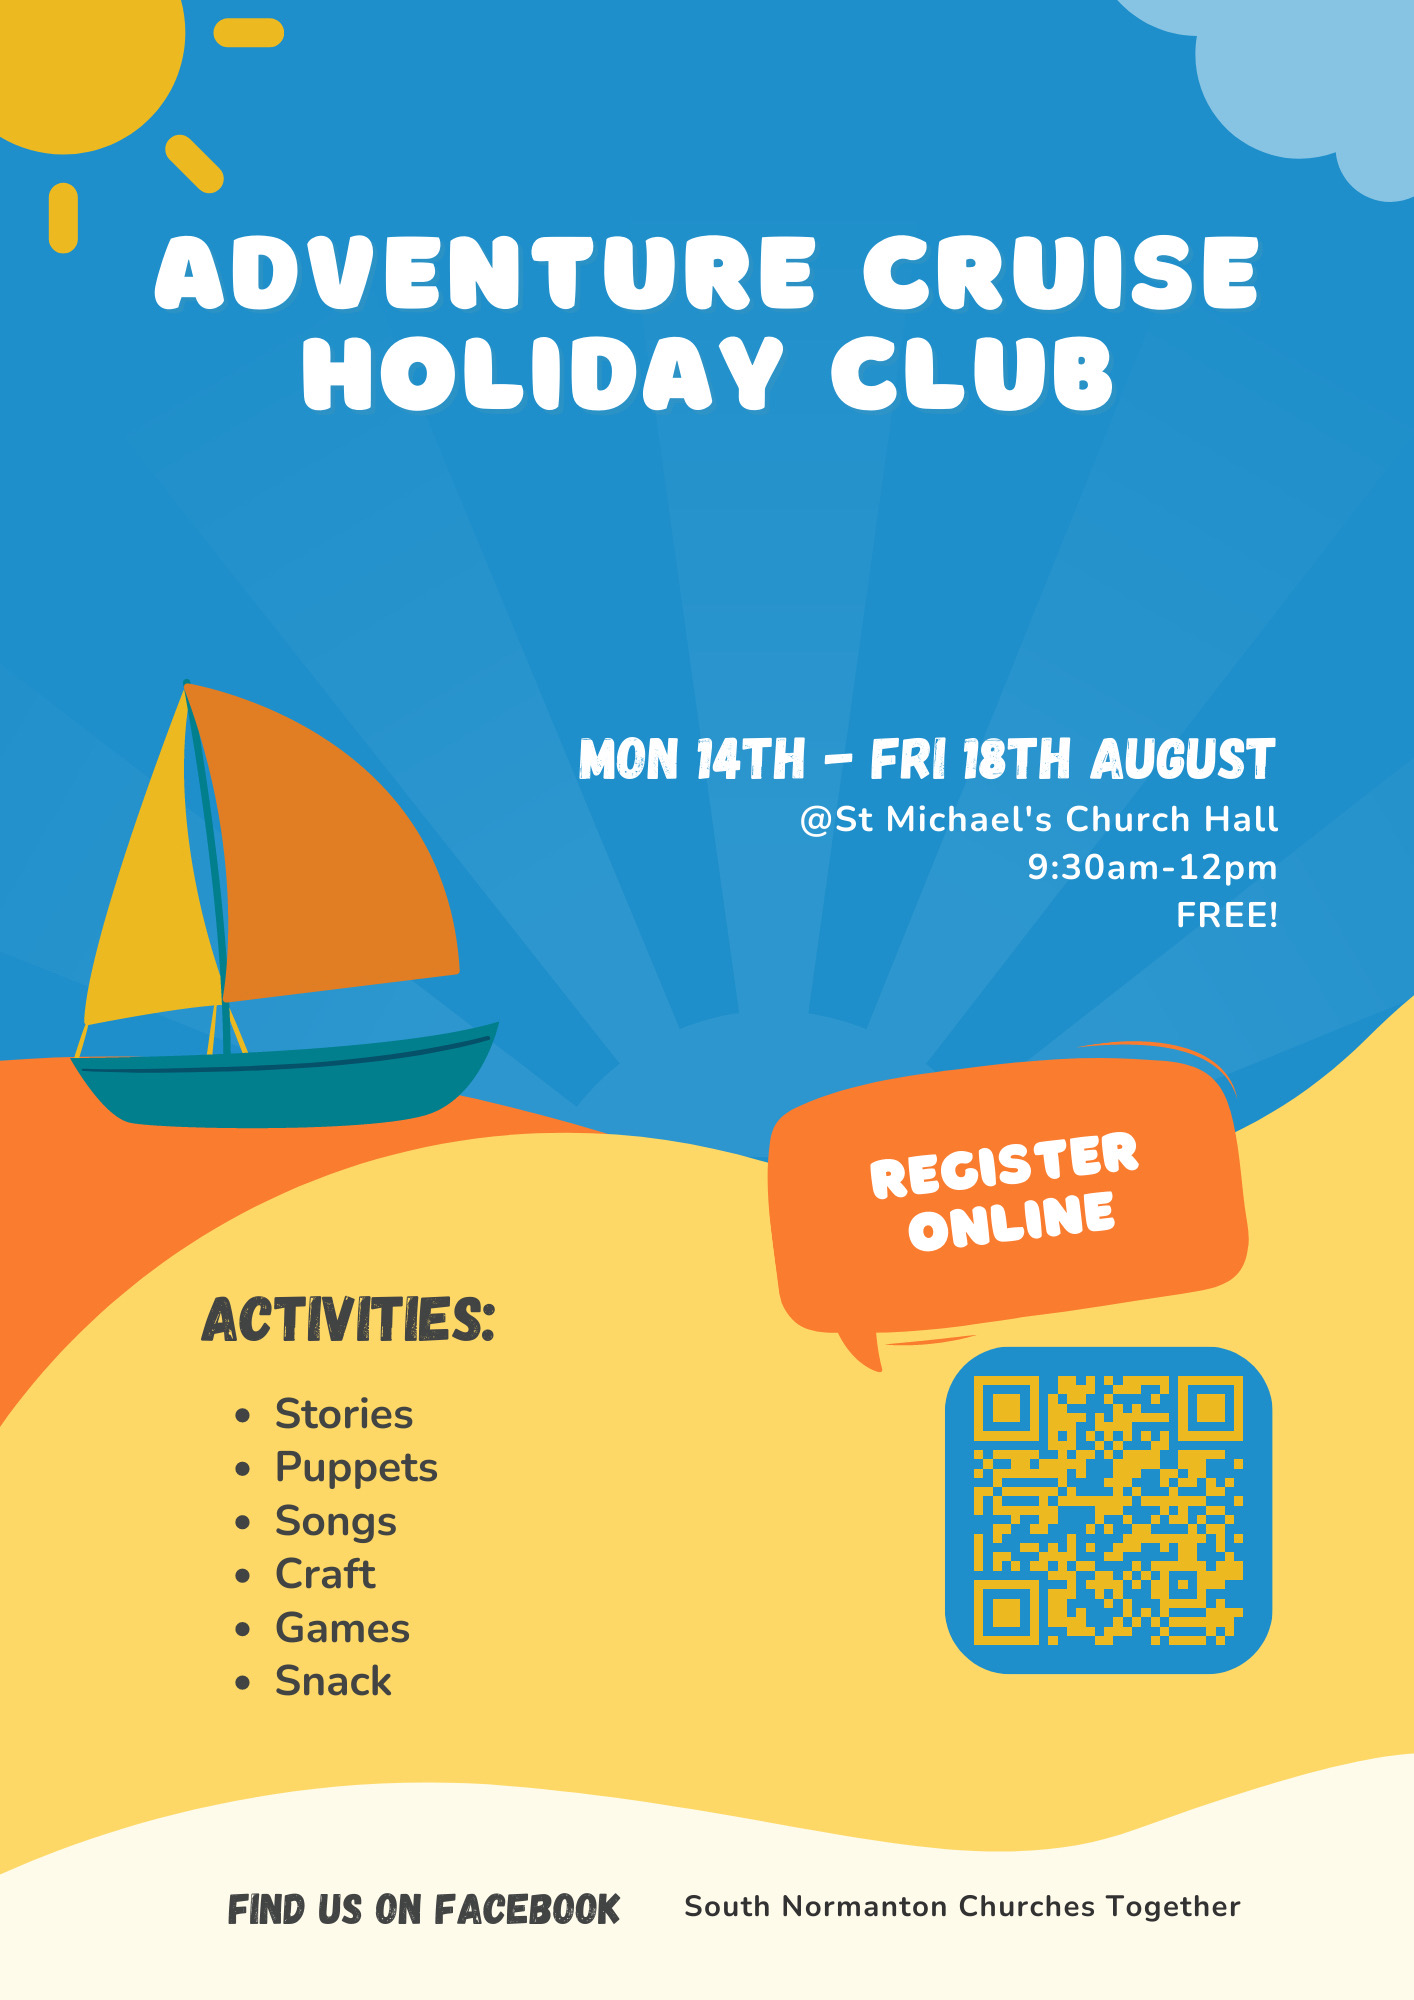 Adventure Cruise Holiday Club will take place at St Michael's Church Hall in South Normanton